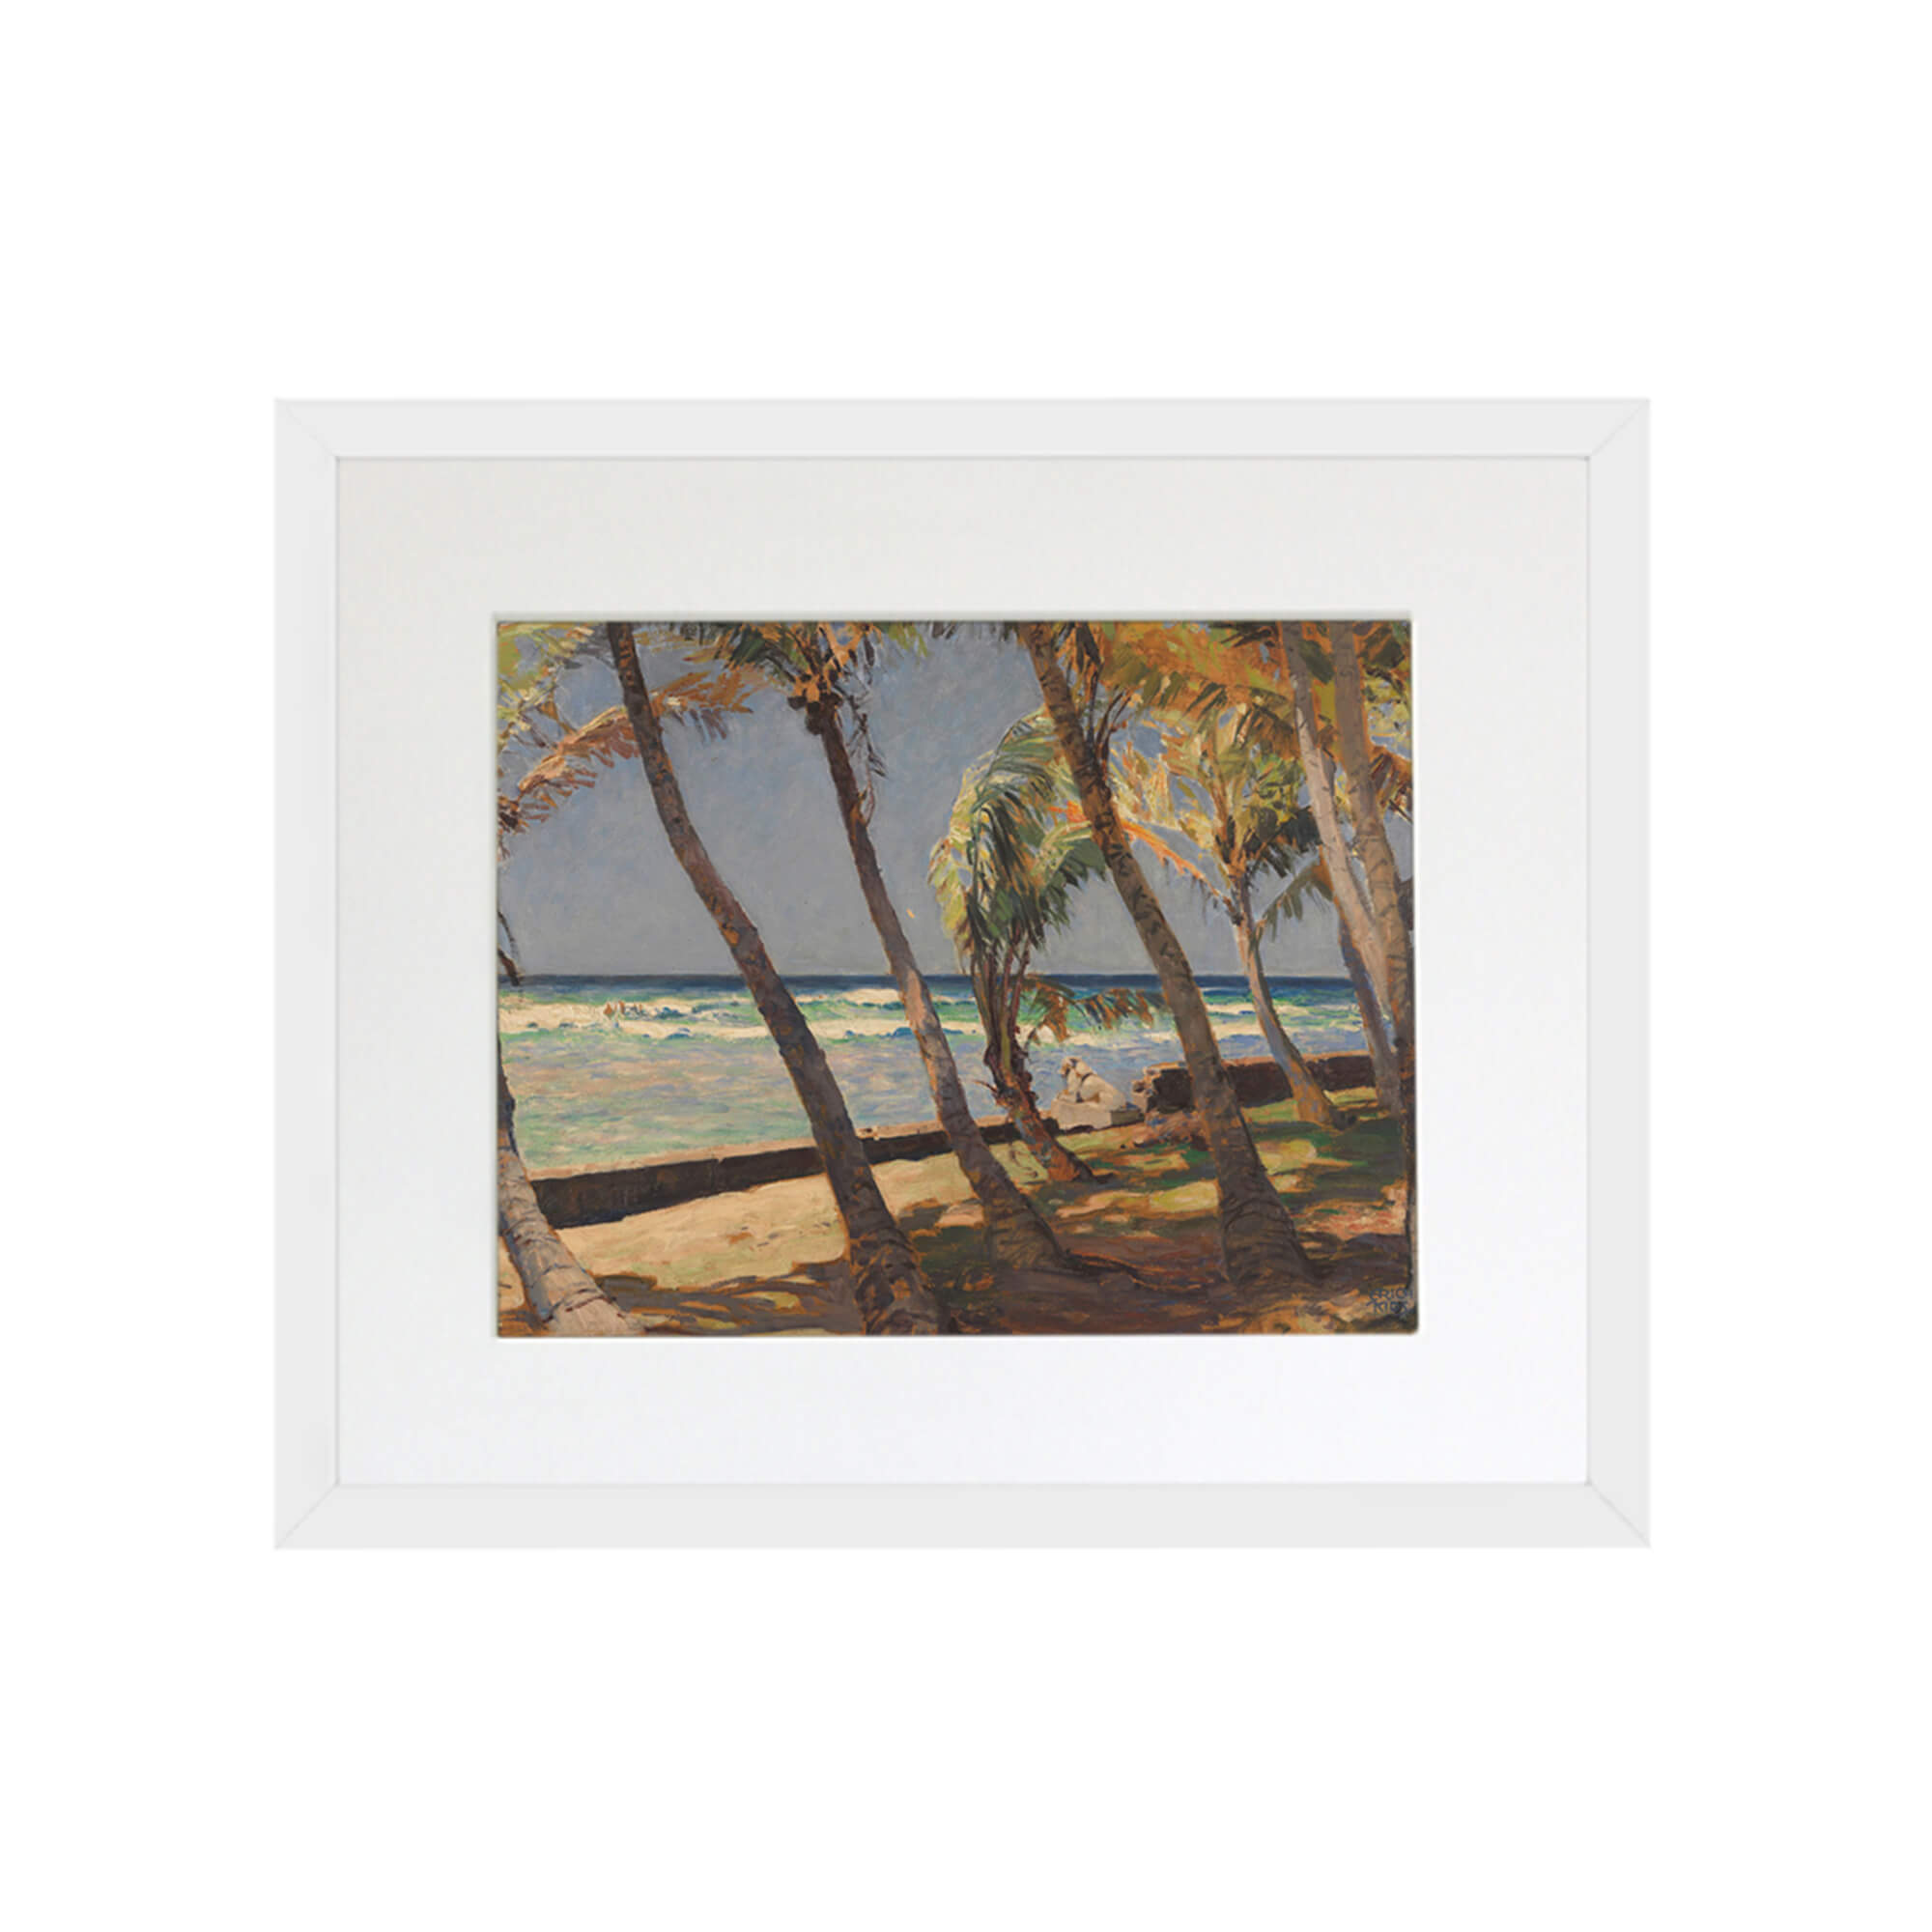 Artwork featuring a vintage-colored beach